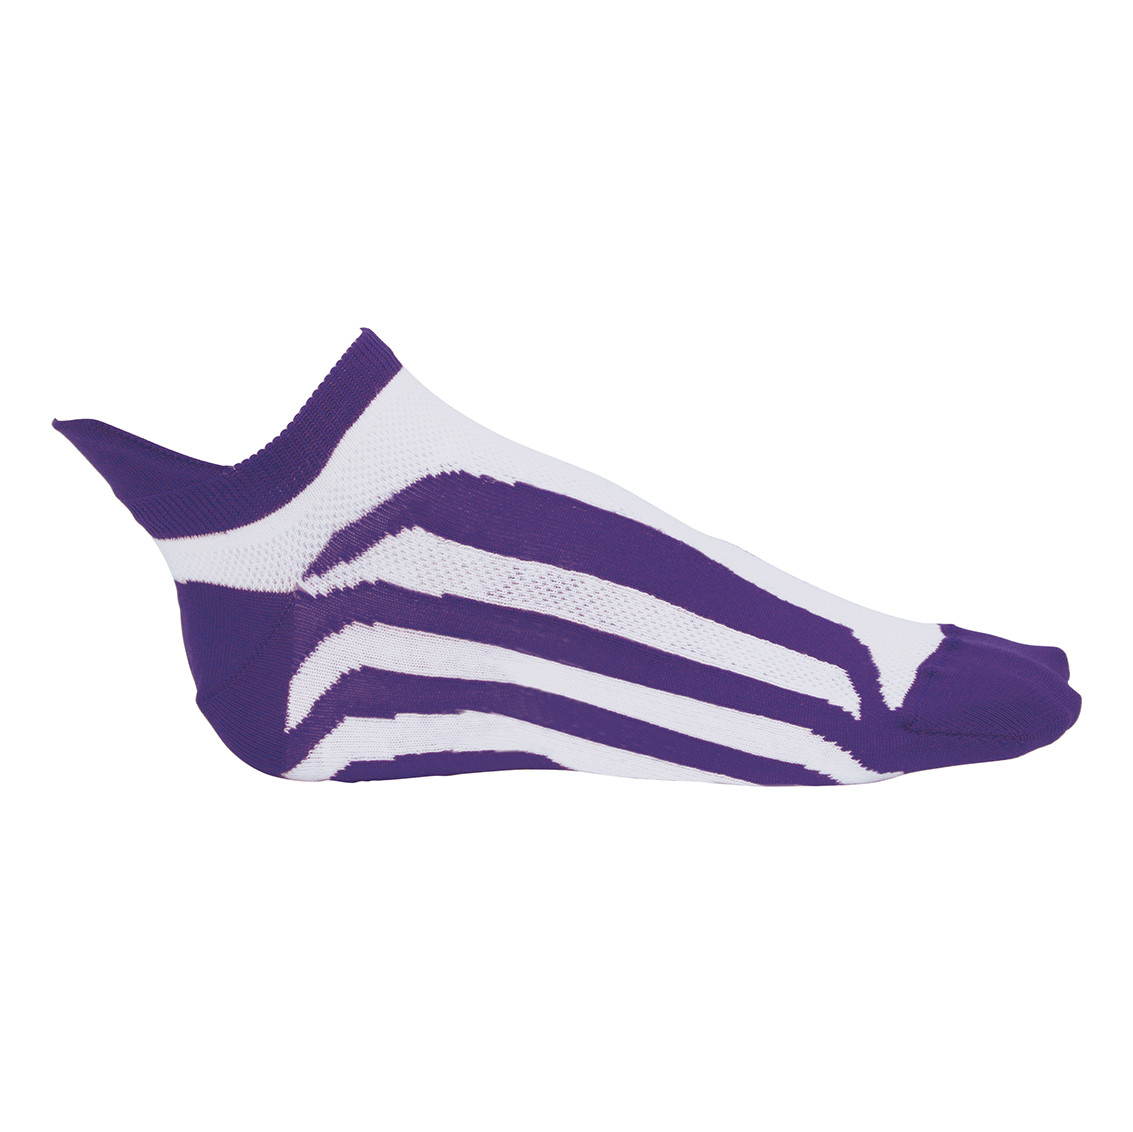 Chaussettes techniques Professional Taille Small/Medium violet